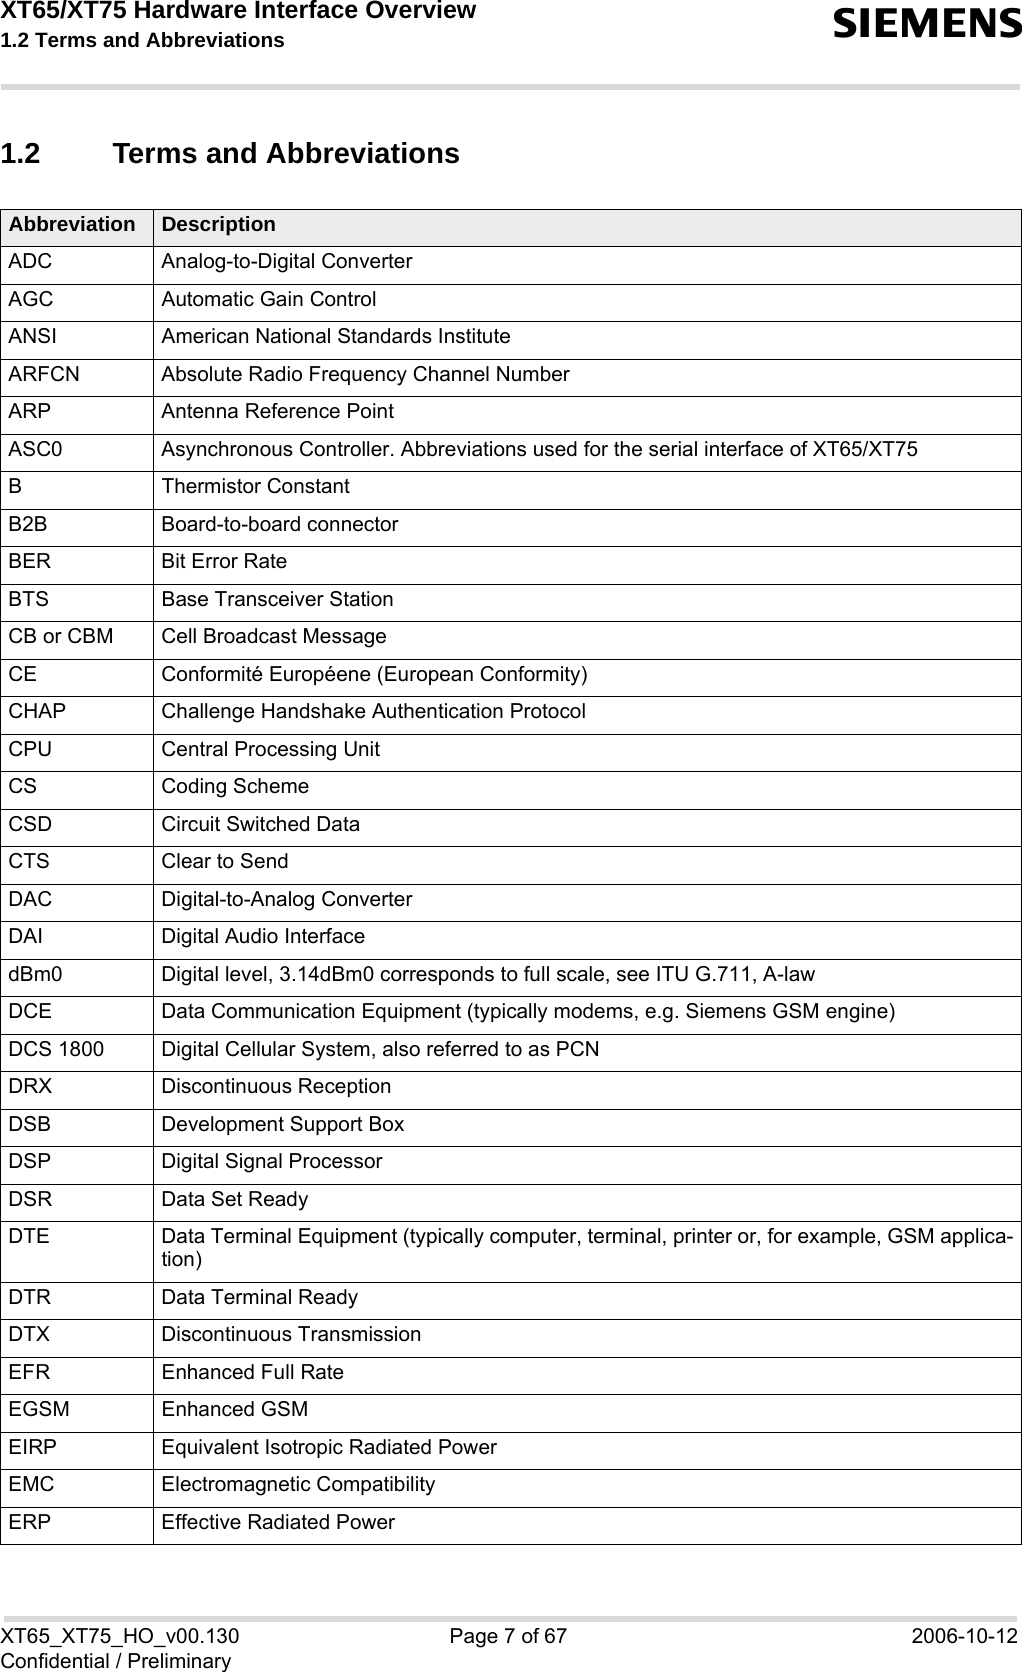 XT65/XT75 Hardware Interface Overview 1.2 Terms and Abbreviations sXT65_XT75_HO_v00.130 Page 7 of 67 2006-10-12Confidential / Preliminary1.2 Terms and AbbreviationsAbbreviation DescriptionADC Analog-to-Digital ConverterAGC Automatic Gain ControlANSI American National Standards InstituteARFCN Absolute Radio Frequency Channel NumberARP Antenna Reference PointASC0  Asynchronous Controller. Abbreviations used for the serial interface of XT65/XT75B Thermistor ConstantB2B Board-to-board connectorBER Bit Error RateBTS Base Transceiver StationCB or CBM Cell Broadcast MessageCE Conformité Européene (European Conformity)CHAP Challenge Handshake Authentication ProtocolCPU Central Processing UnitCS Coding SchemeCSD Circuit Switched DataCTS Clear to SendDAC Digital-to-Analog ConverterDAI Digital Audio InterfacedBm0 Digital level, 3.14dBm0 corresponds to full scale, see ITU G.711, A-lawDCE Data Communication Equipment (typically modems, e.g. Siemens GSM engine)DCS 1800 Digital Cellular System, also referred to as PCNDRX Discontinuous ReceptionDSB Development Support BoxDSP Digital Signal ProcessorDSR Data Set ReadyDTE Data Terminal Equipment (typically computer, terminal, printer or, for example, GSM applica-tion)DTR Data Terminal ReadyDTX Discontinuous TransmissionEFR Enhanced Full RateEGSM Enhanced GSMEIRP Equivalent Isotropic Radiated PowerEMC Electromagnetic CompatibilityERP Effective Radiated Power